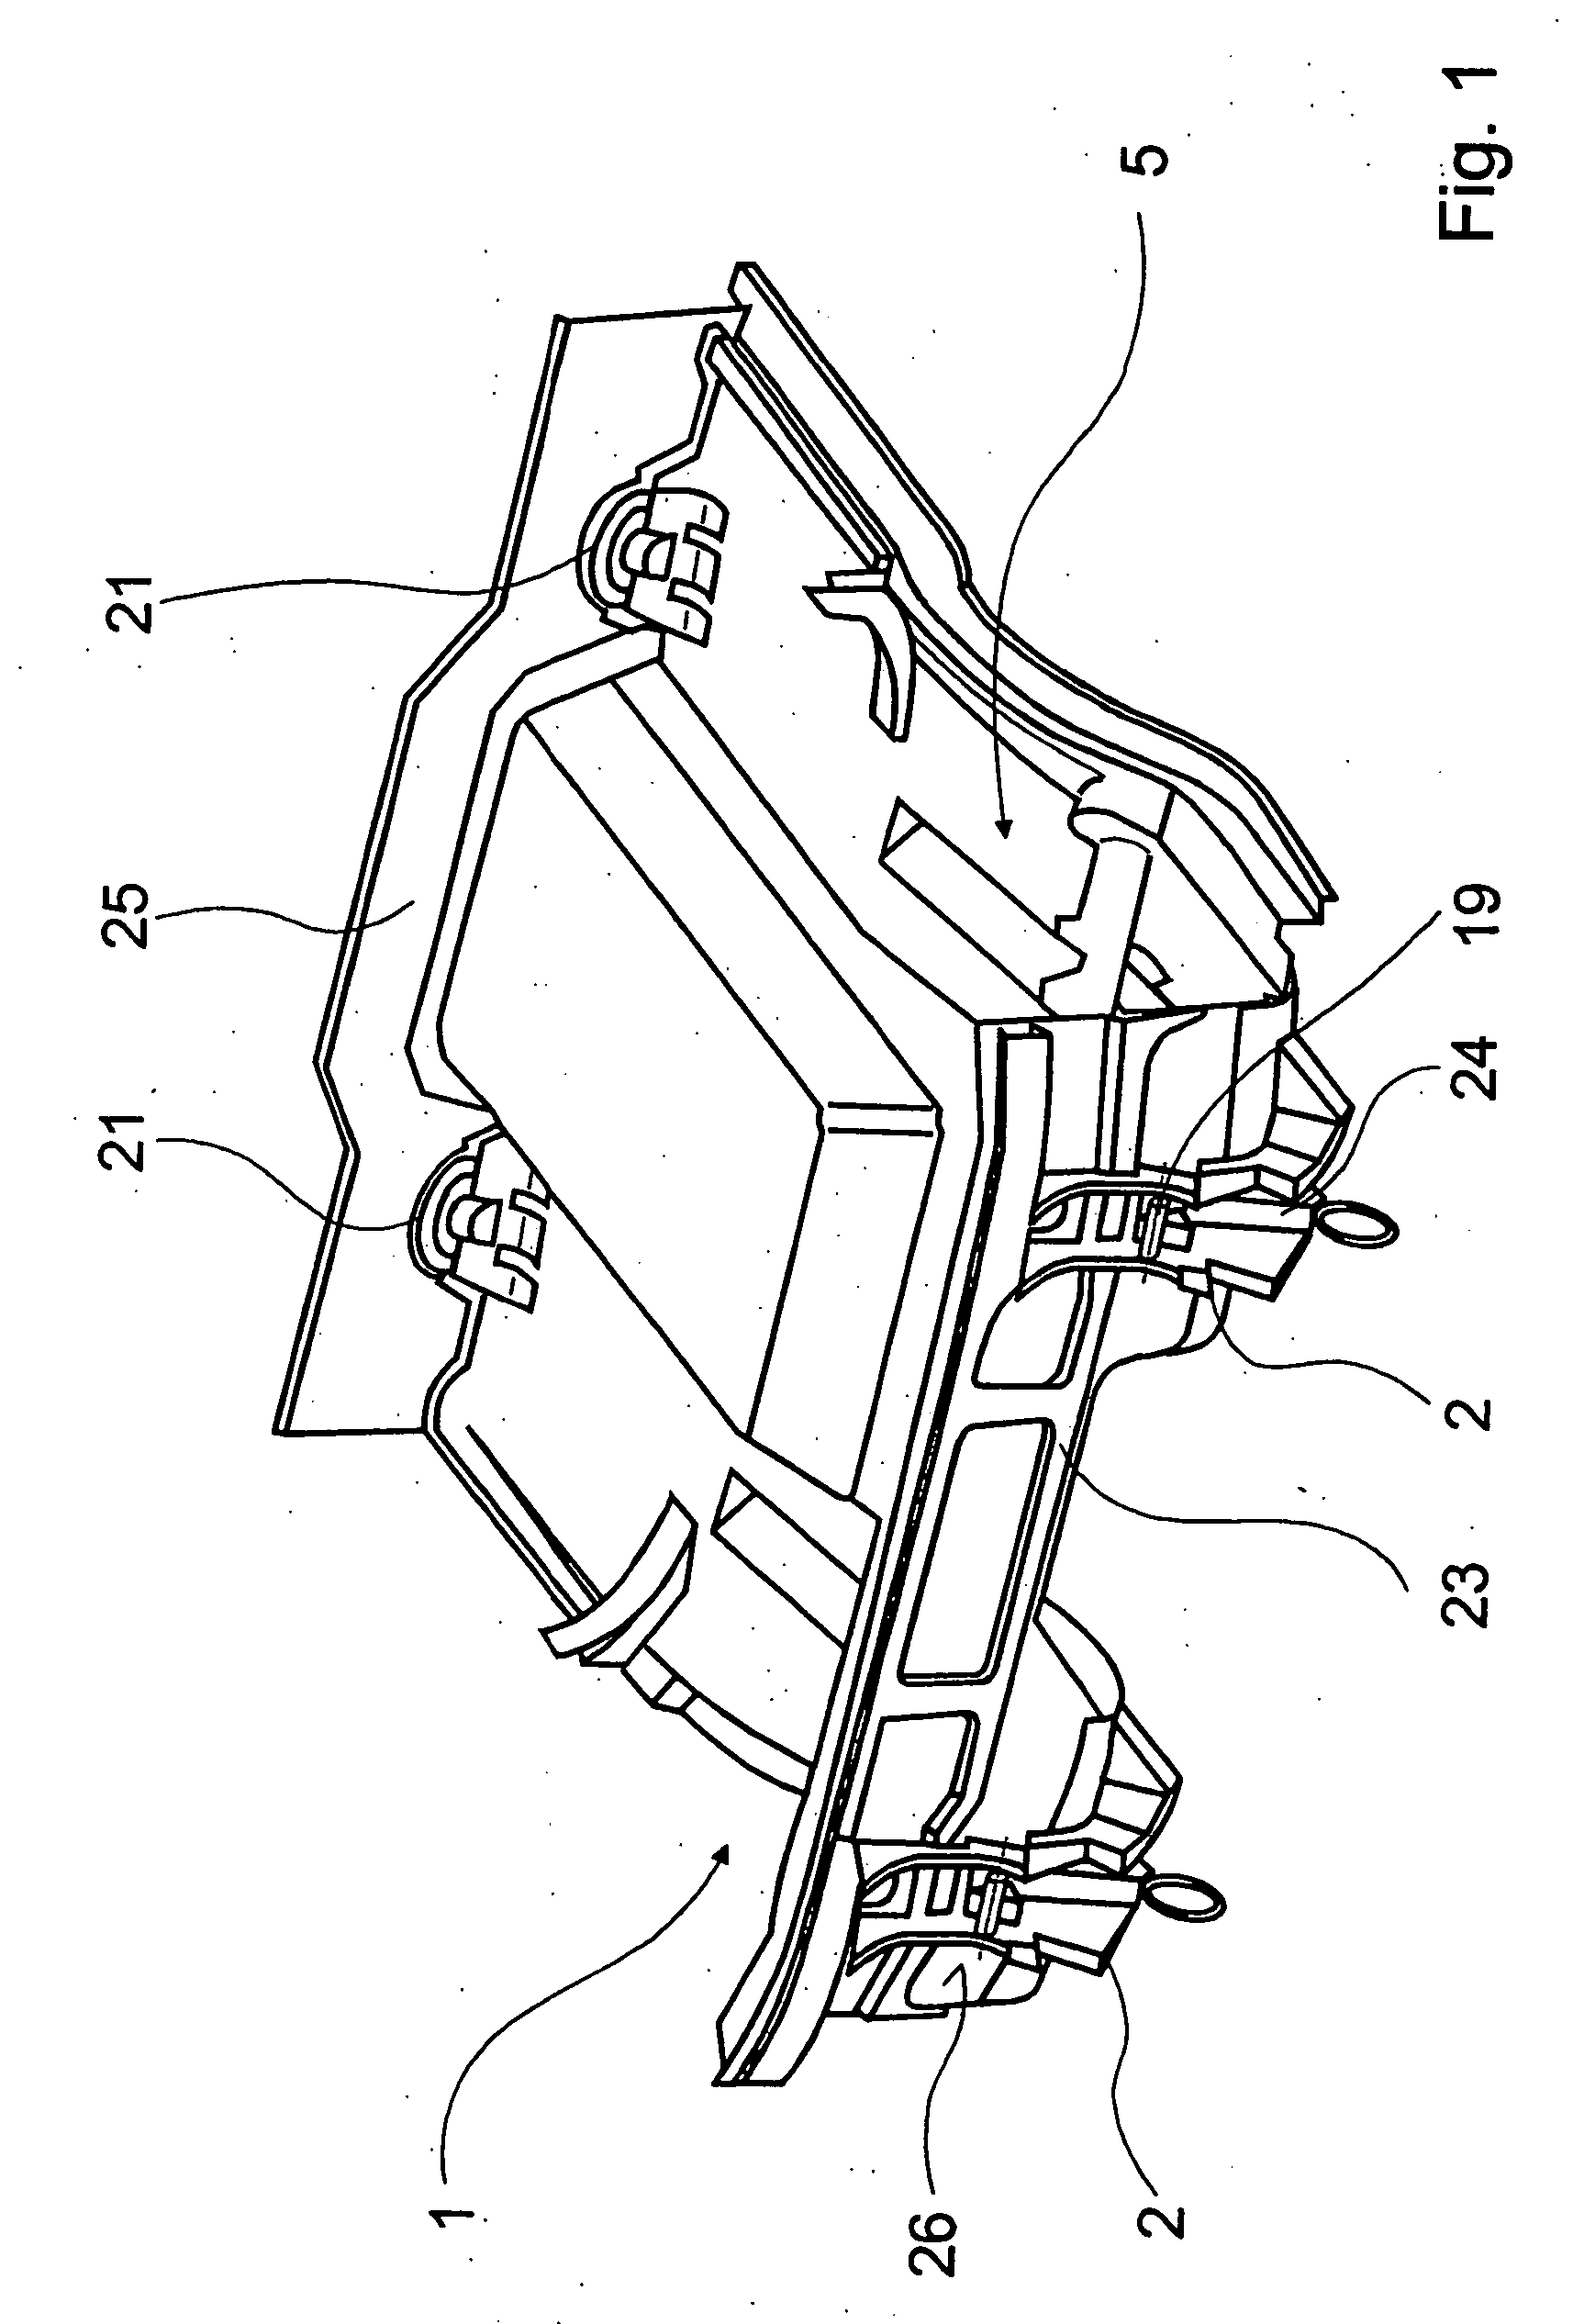 Longitudinal Beam for a Driver's Cab and Carrier Structure Comprising One Such Longitudinal Beam